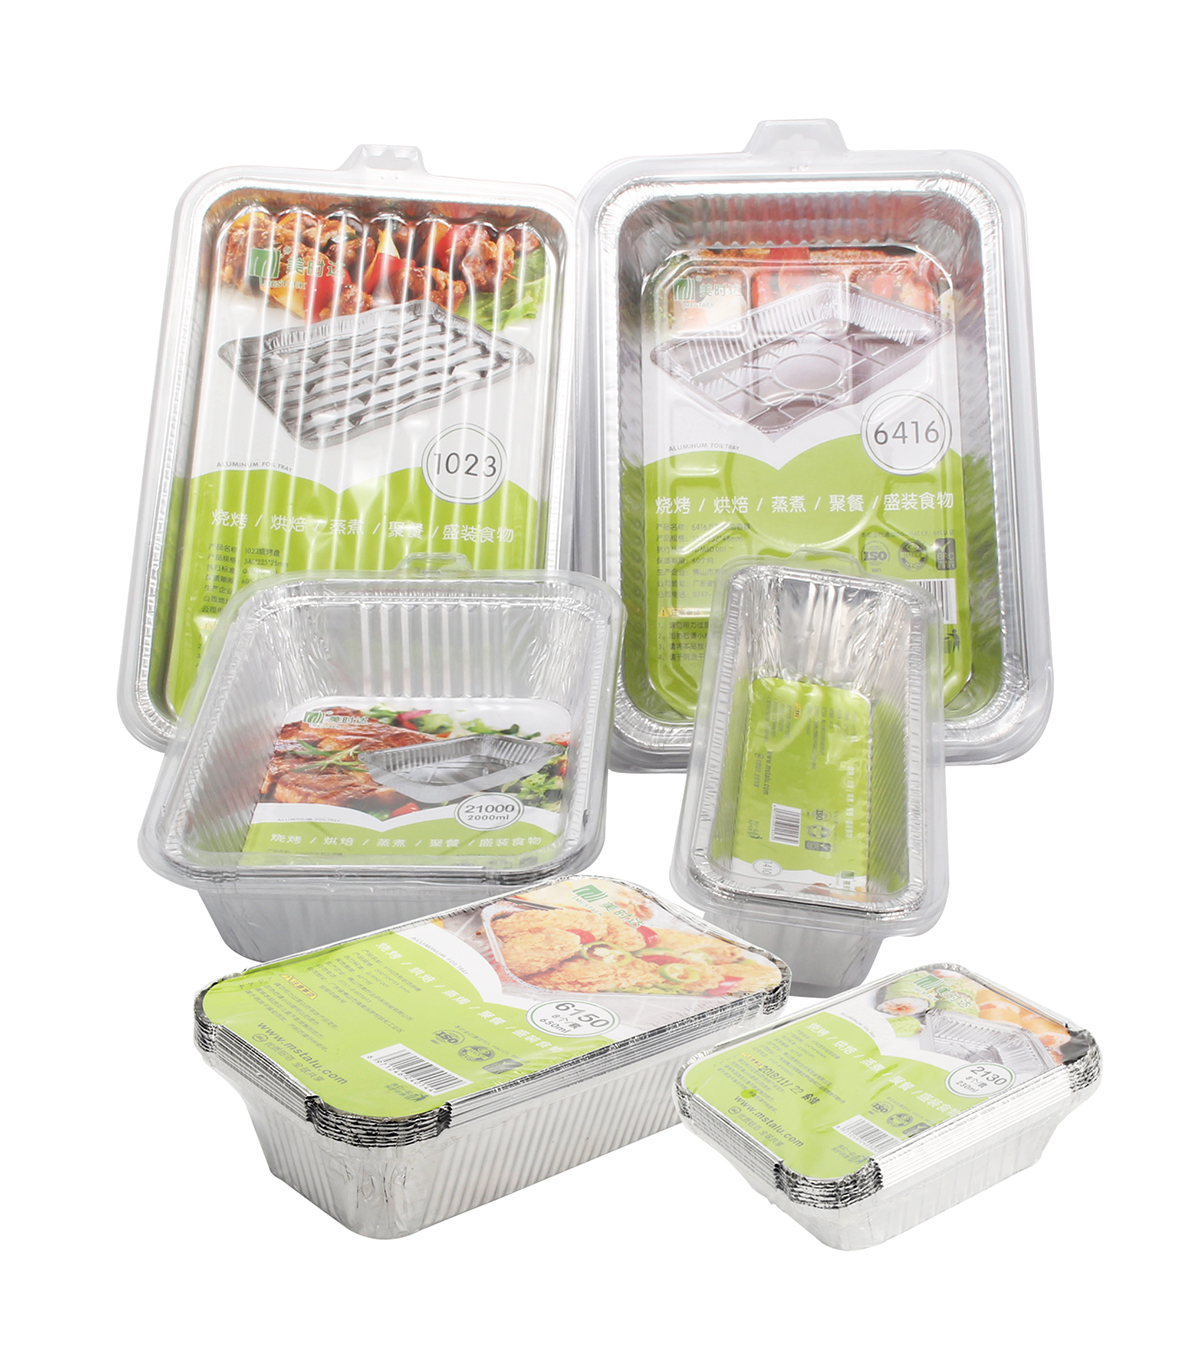 Take Out Food Storage Containers